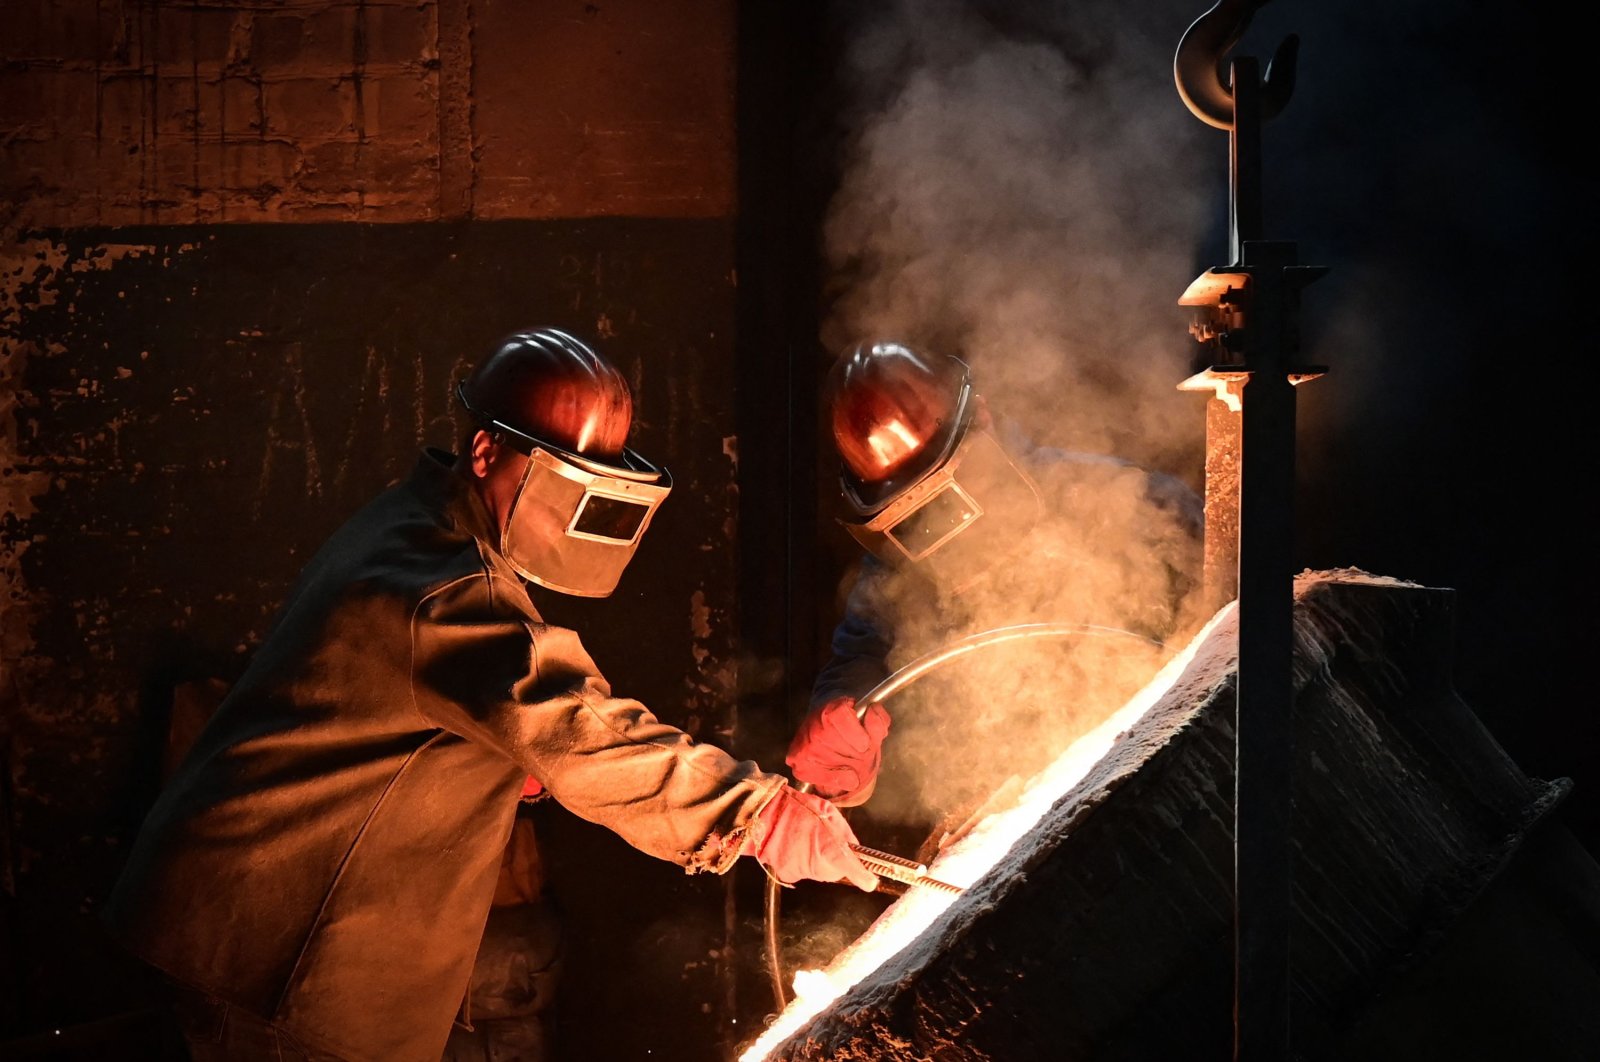 Workers pour metal at a private Berdyansk foundry in Berdyansk, amid the ongoing Russian military action in Ukraine, June 14, 2022. (AFP Photo) 